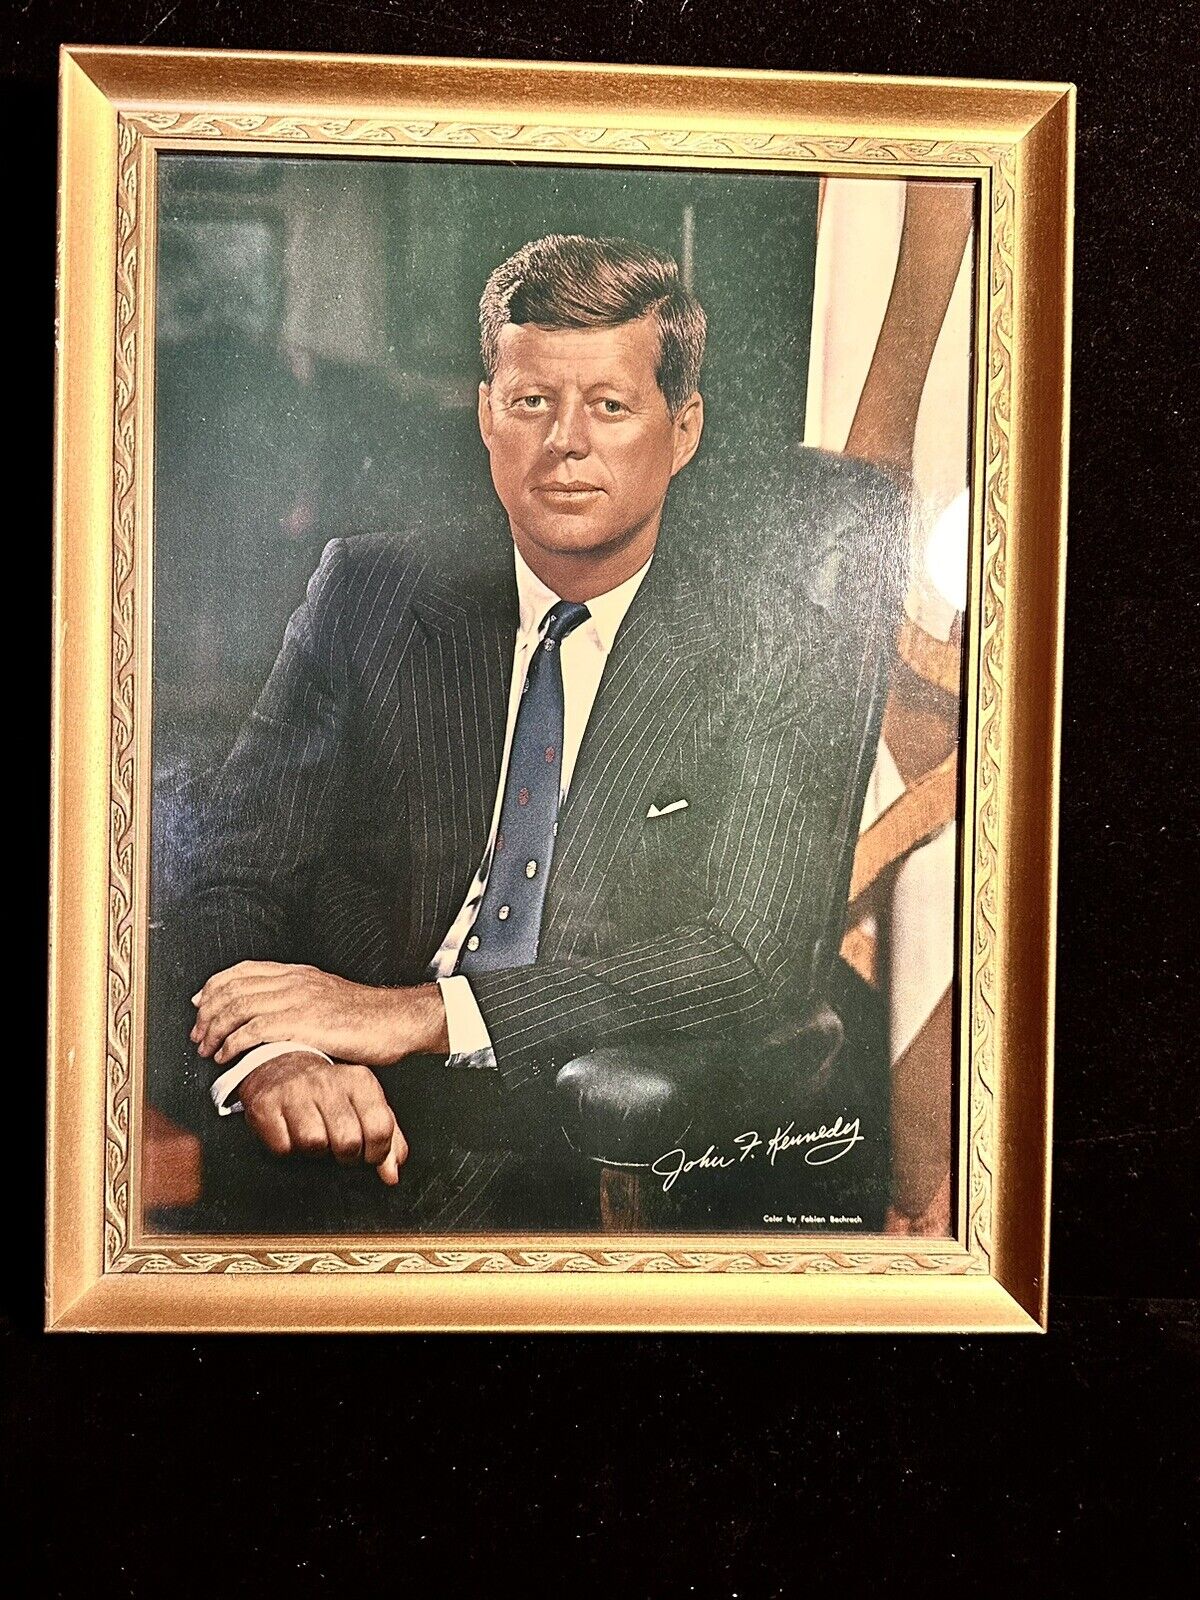 John F. Kennedy Signed Photo in frame - Excellent Condition-vintage